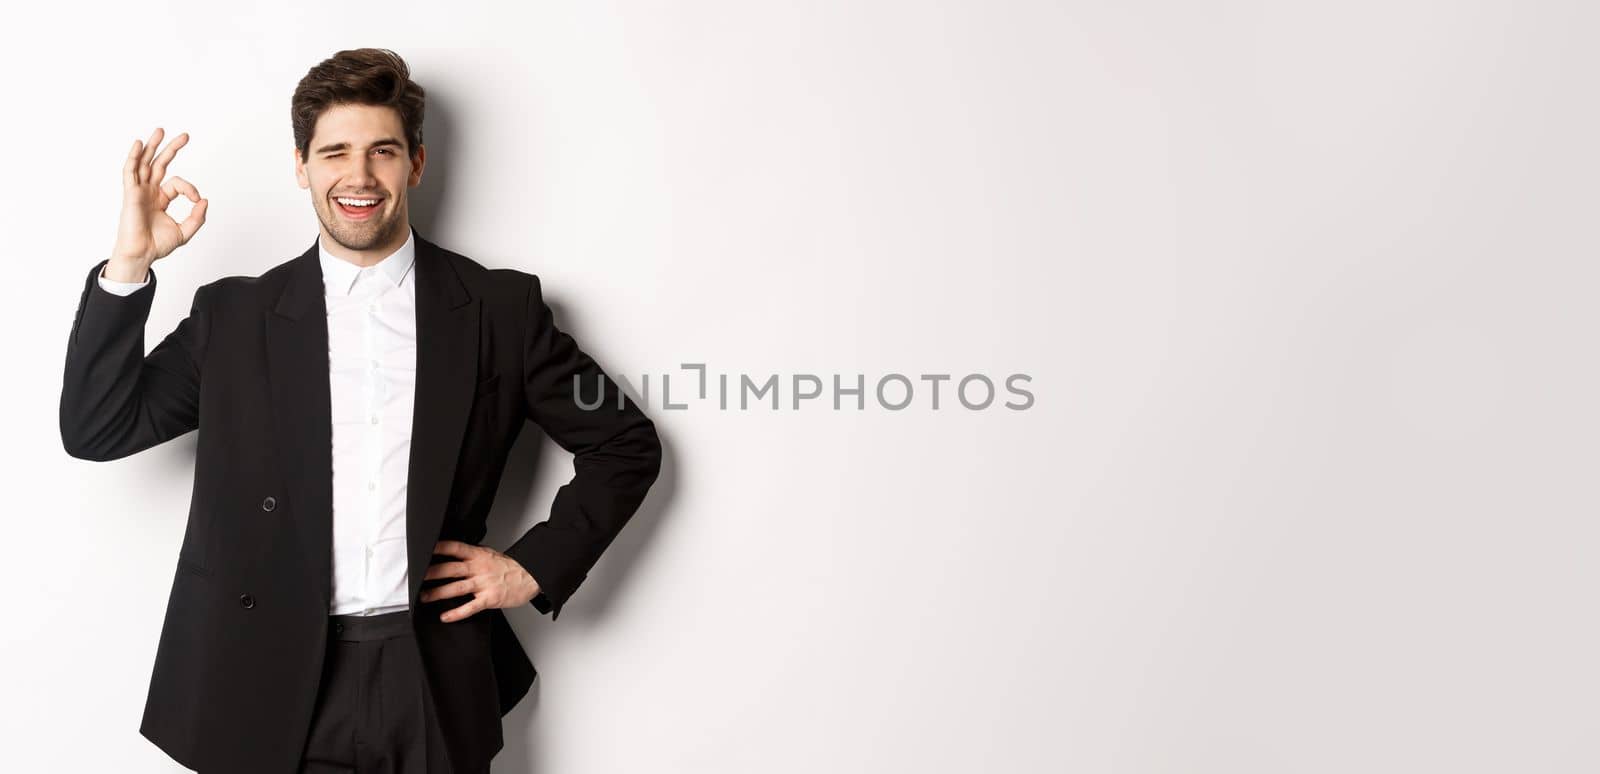 Concept of new year party, celebration and lifestyle. Portrait of confident, successful businessman in suit, showing okay sign and winking, approve something good, white background.